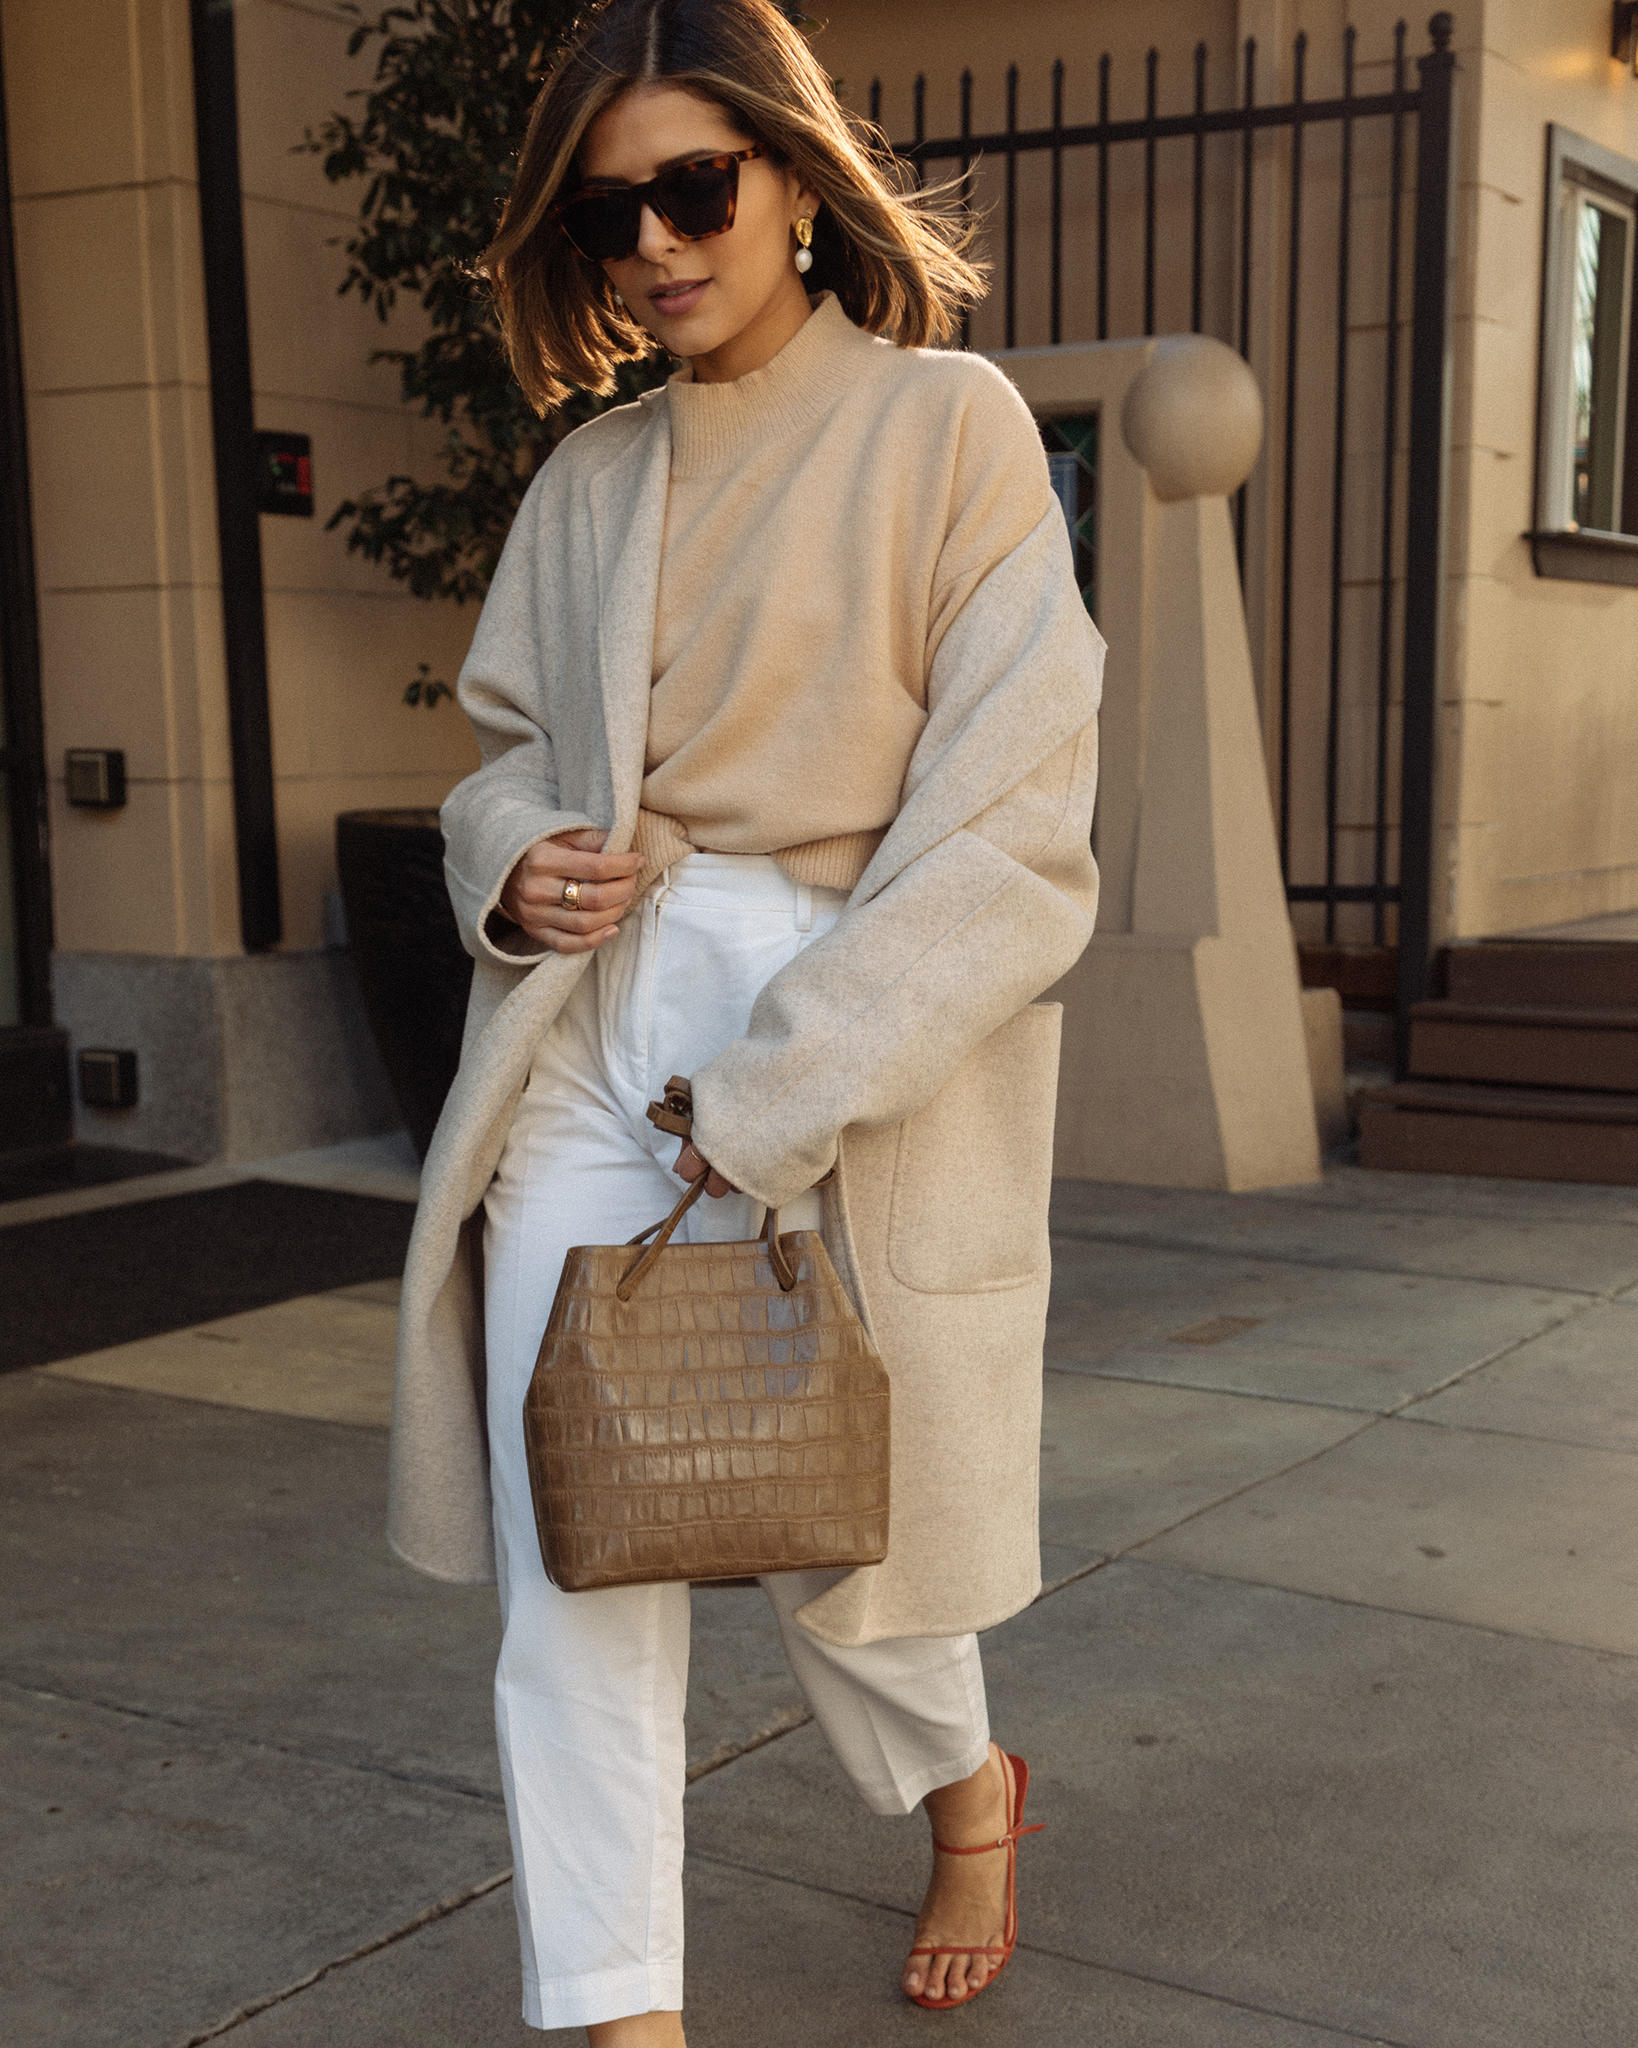 Spring Neutrals Outfit - White on White With Nude